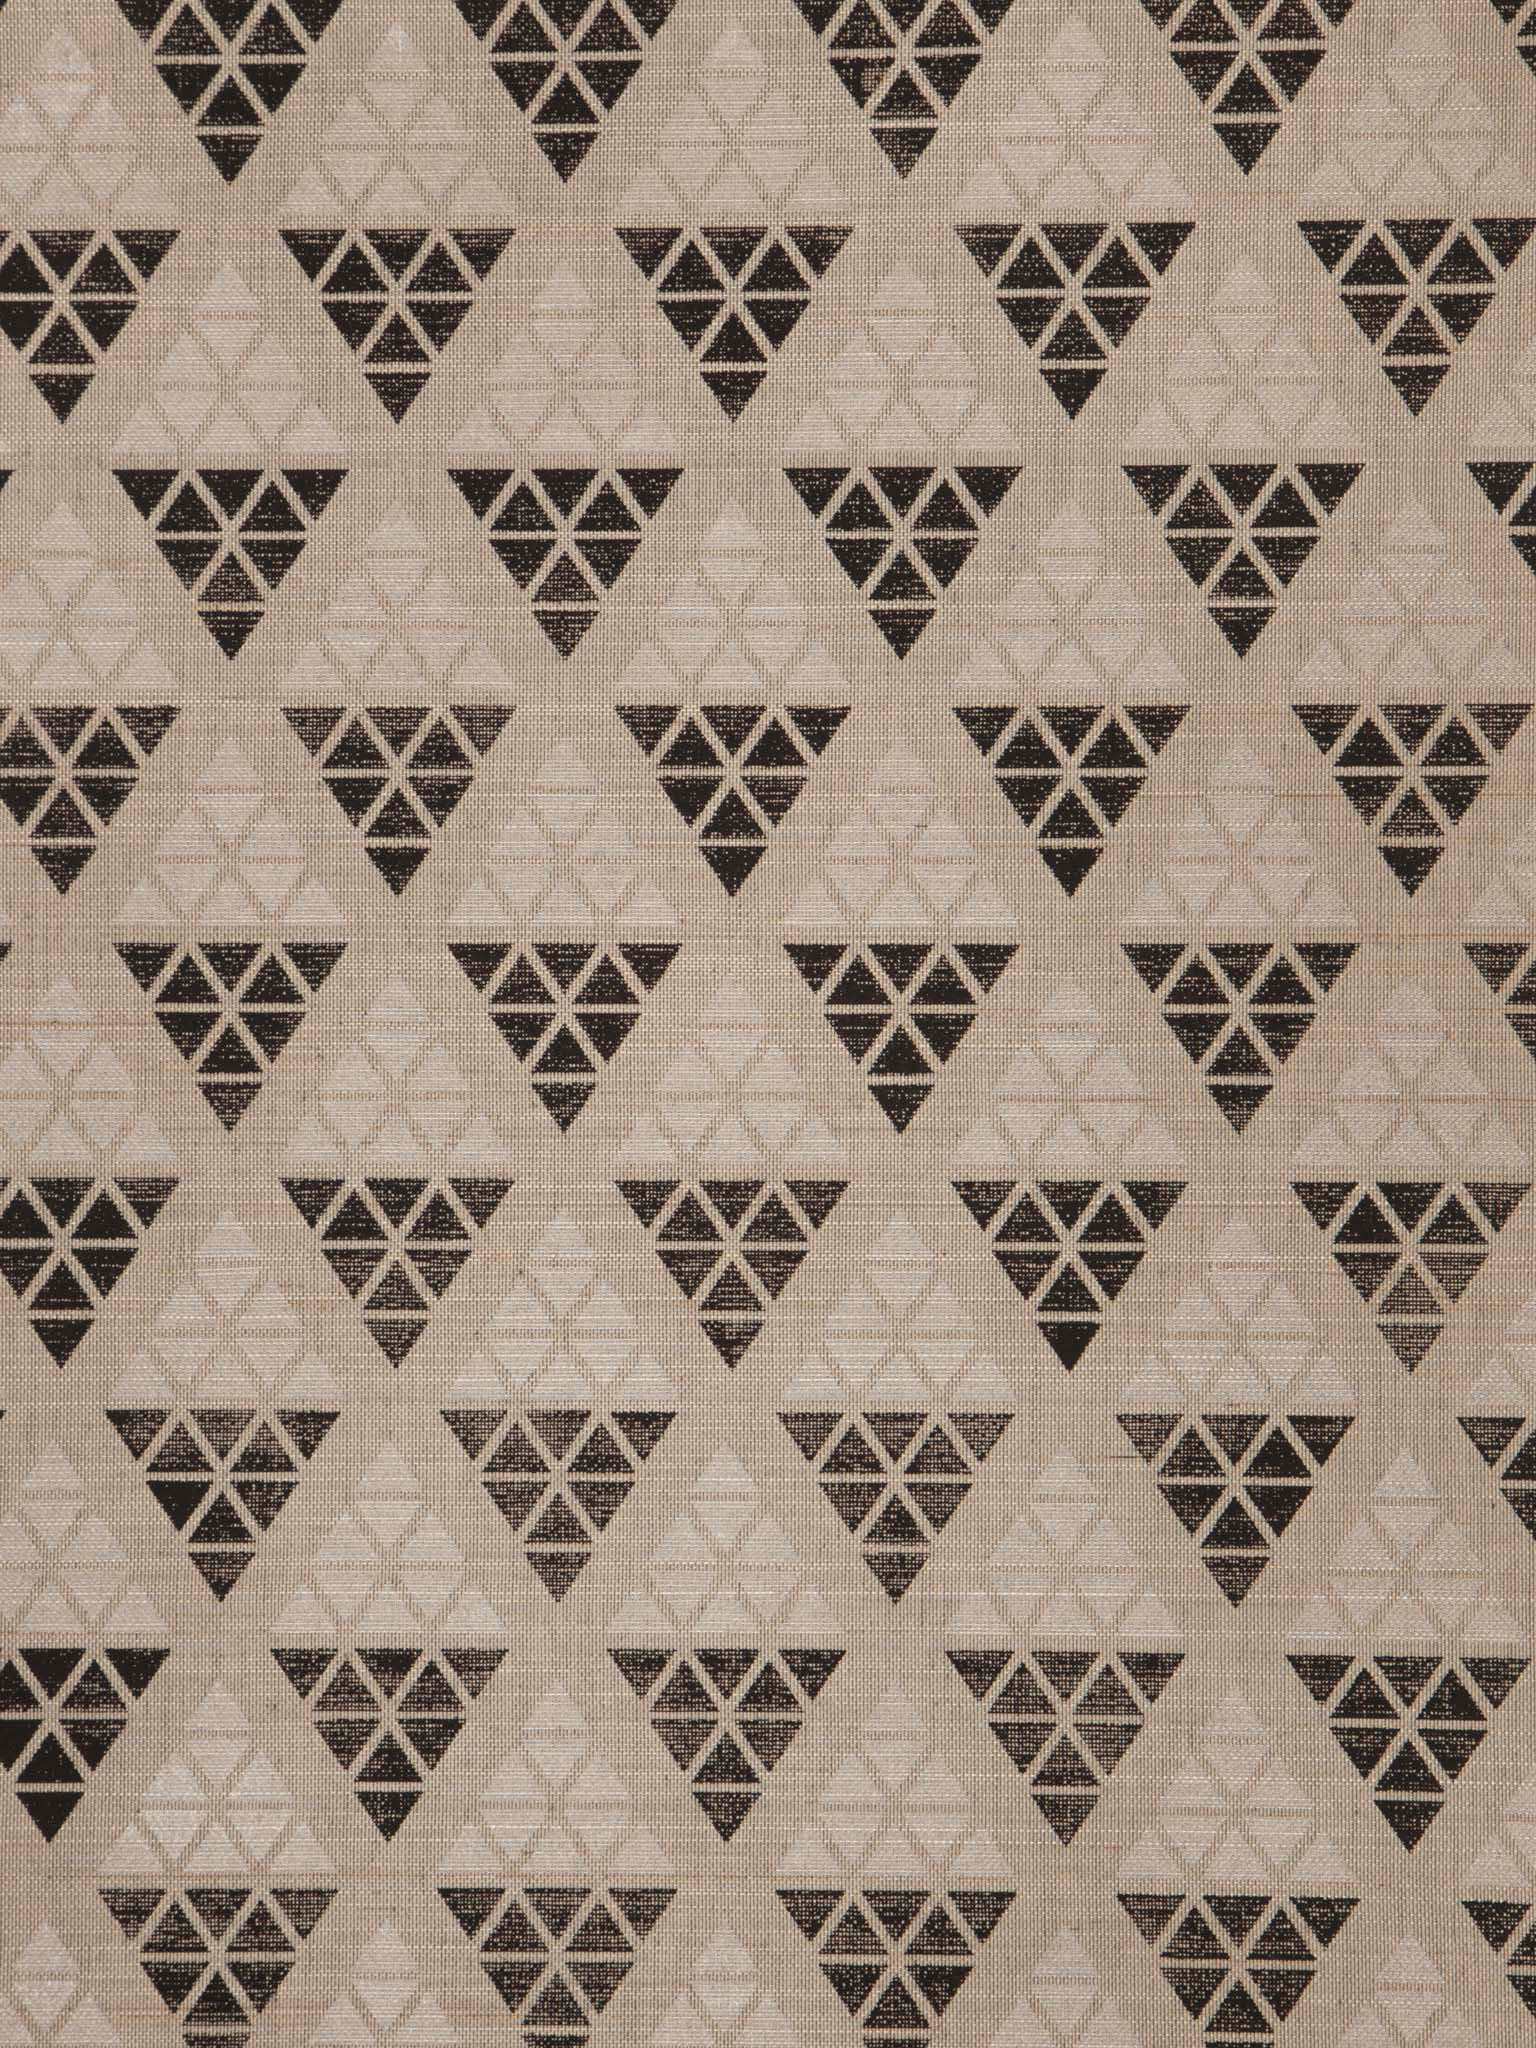 1536x2048 15 Modern Grasscloth Wallpapers for Fall